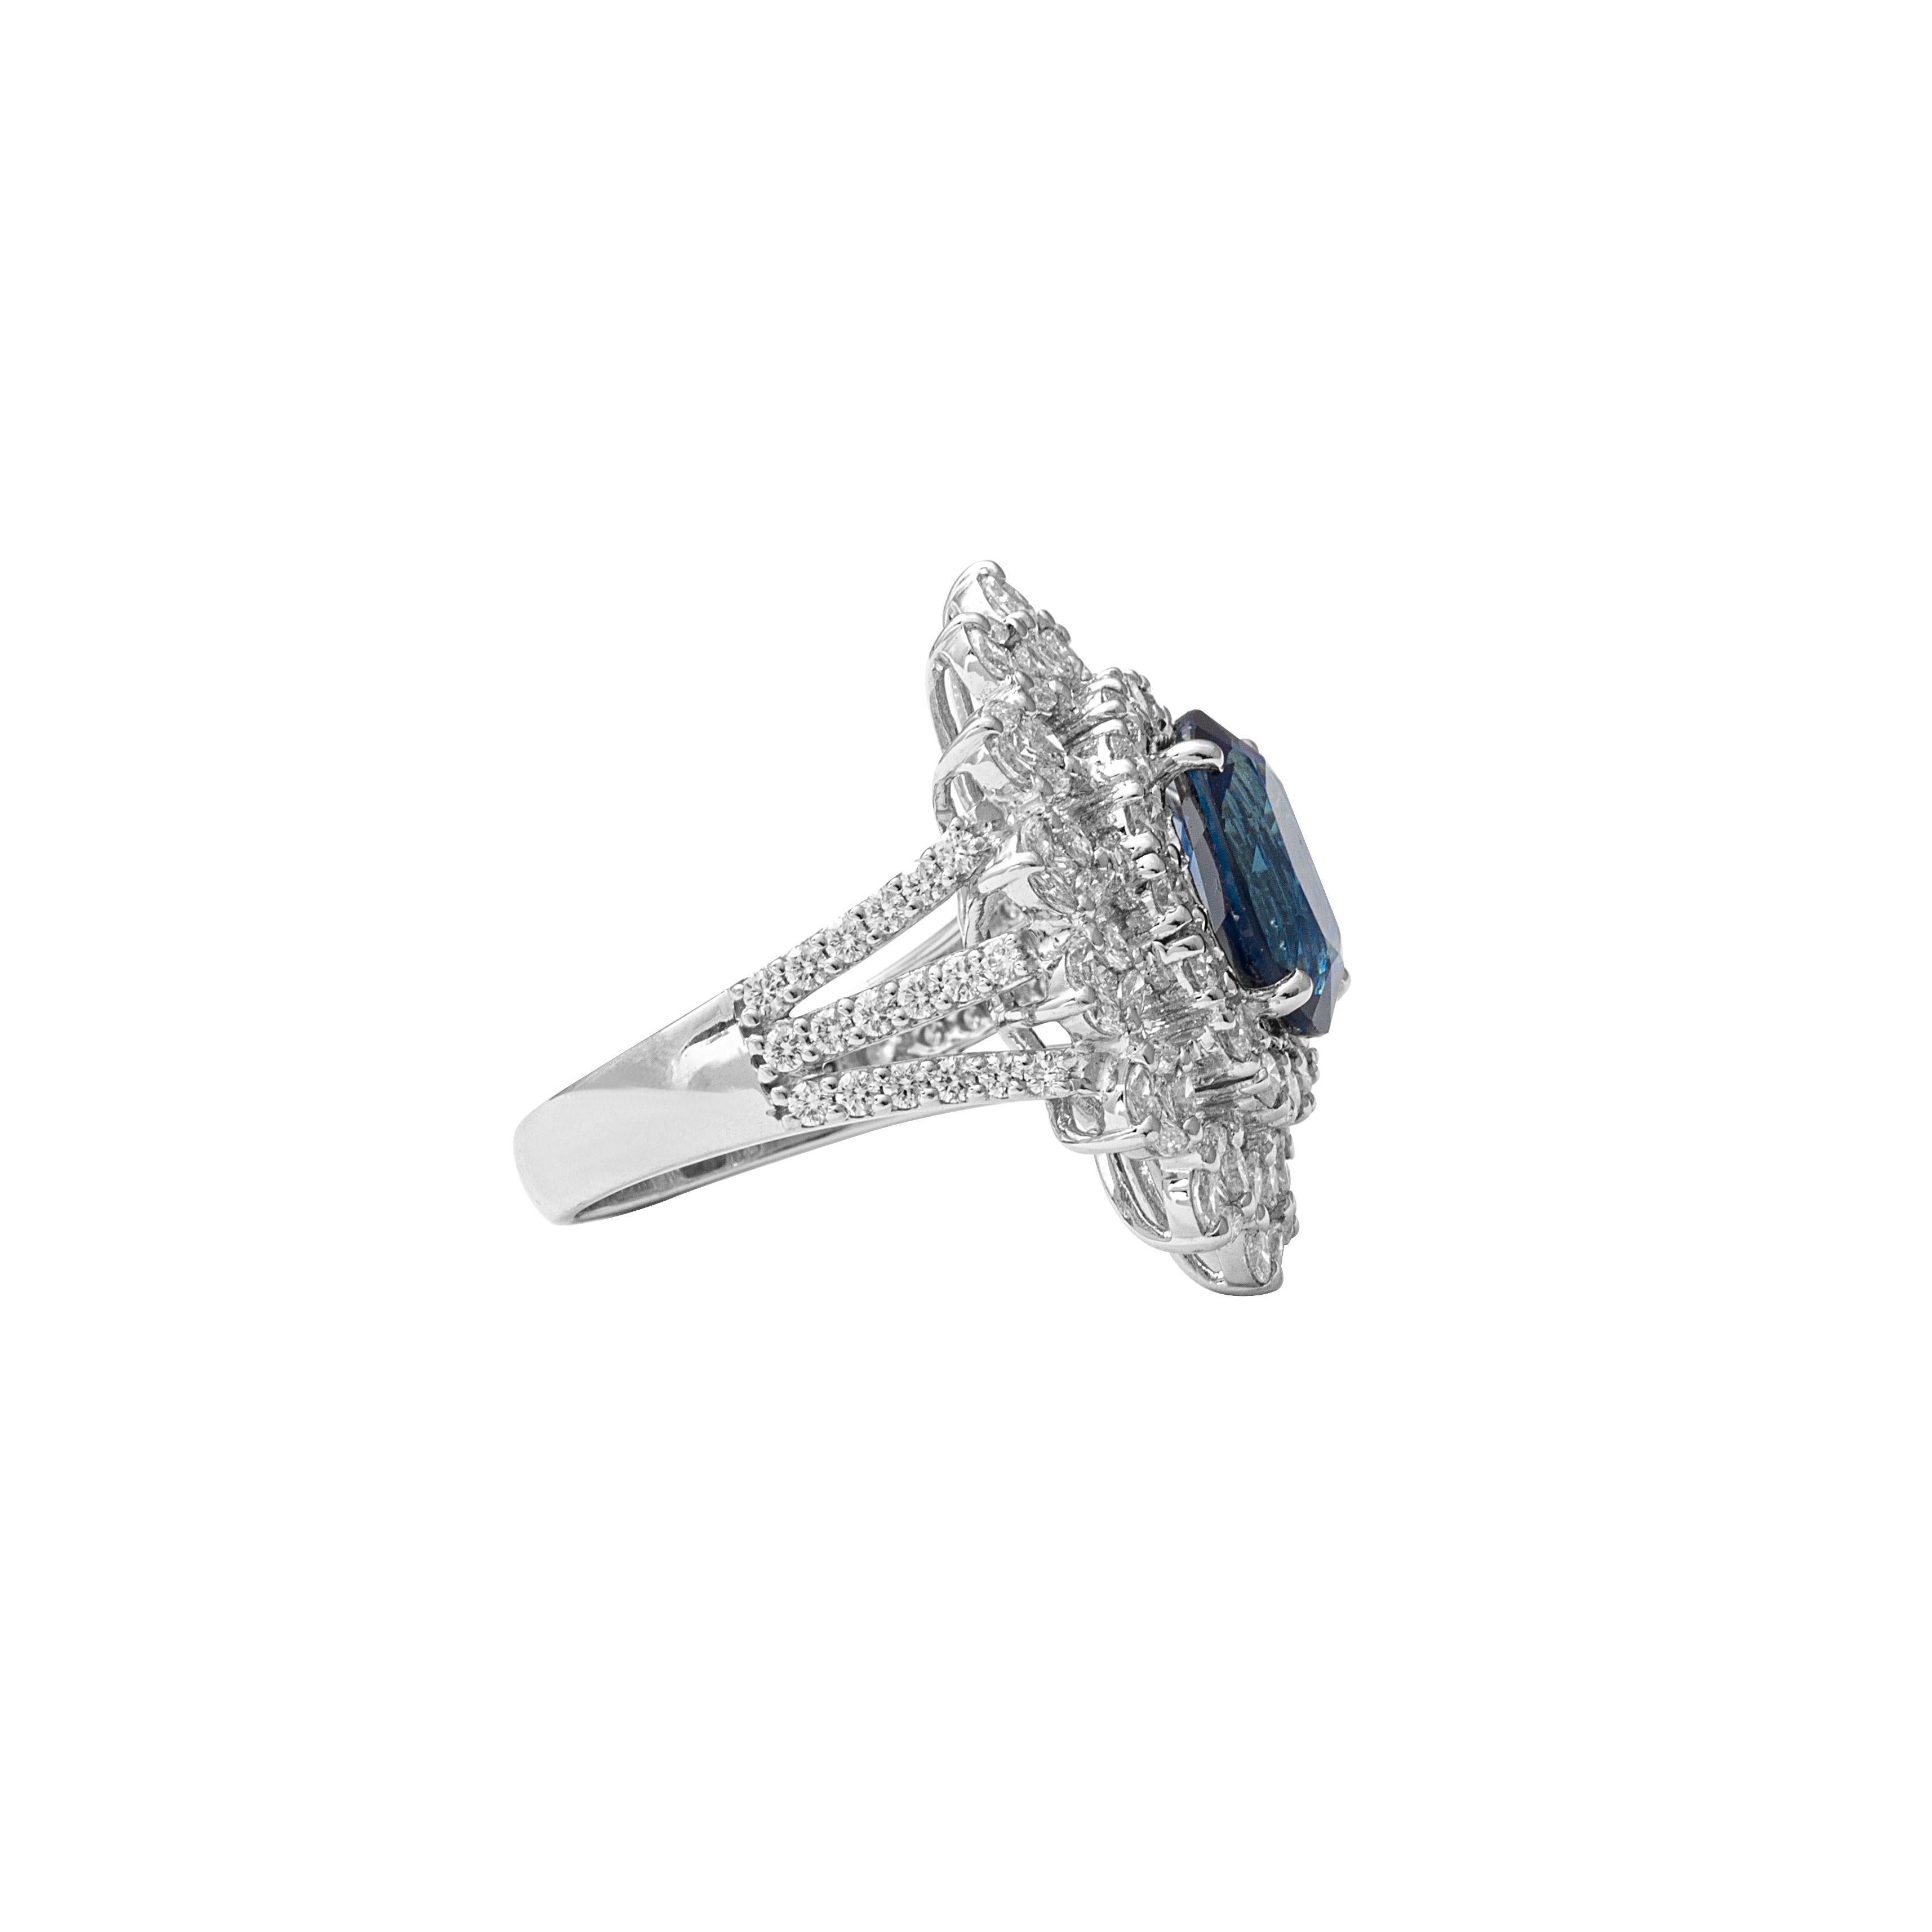 18 Karat White Gold Diamond And Blue Sapphire Cocktail Ring

A beautiful and trendy ring set in 18 karat gold studded with VVS quality diamonds and a royal blue sapphire. This ring is perfect for cocktails and evening events.

18 Karat Gold -